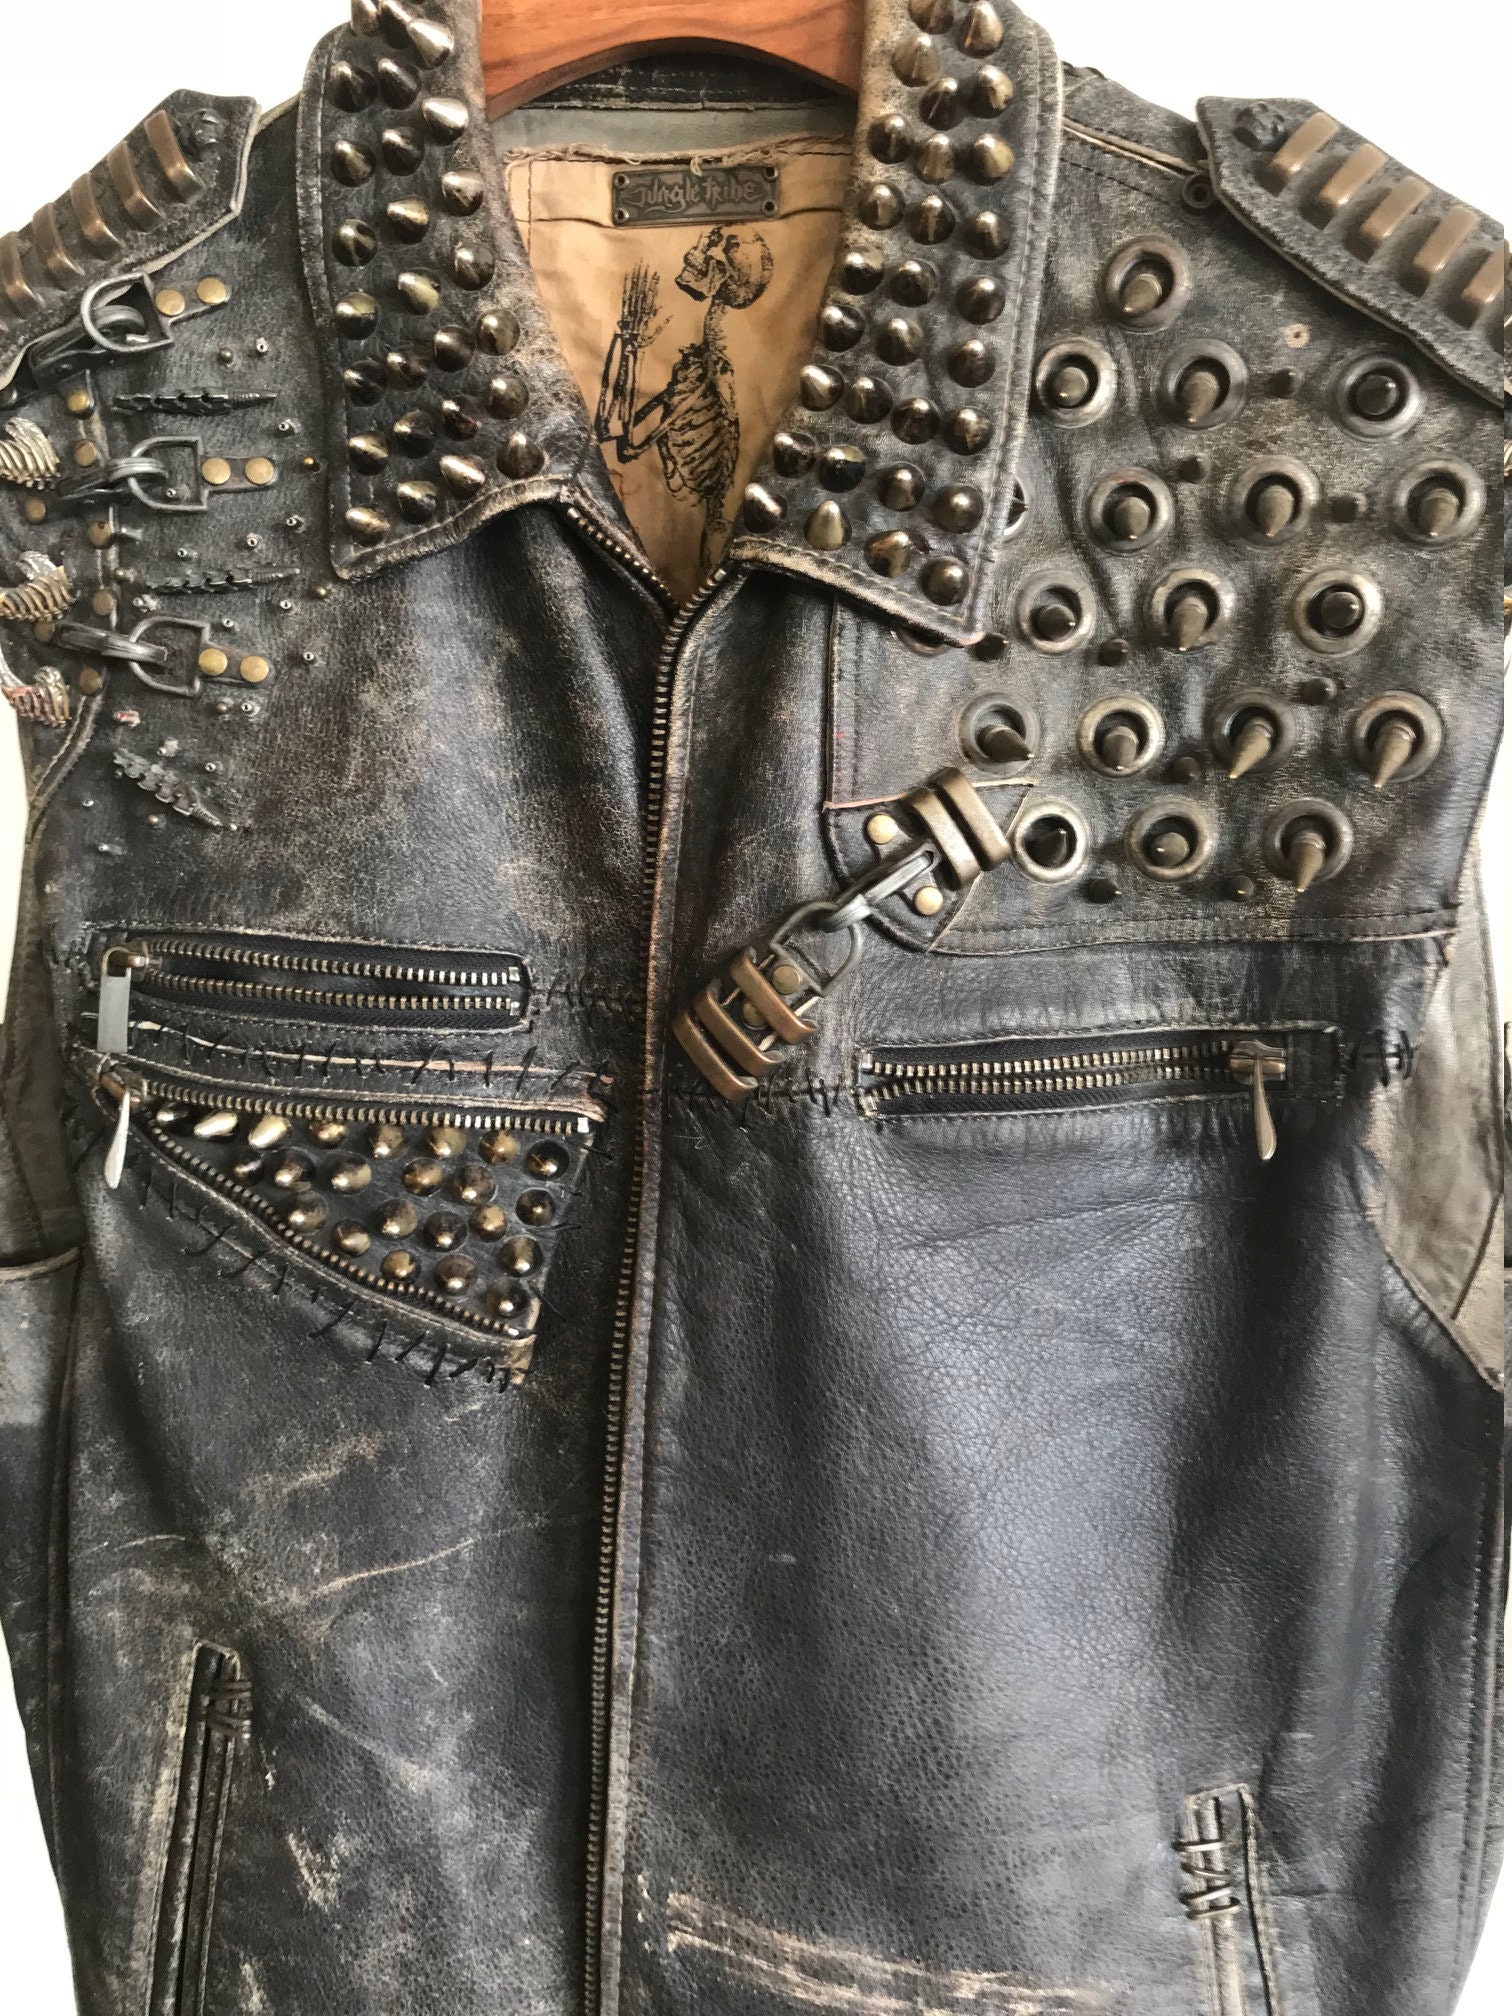 INDUSTRIAL UNREST Leather Spiked Studded and Distressed Jacket Cut Vest